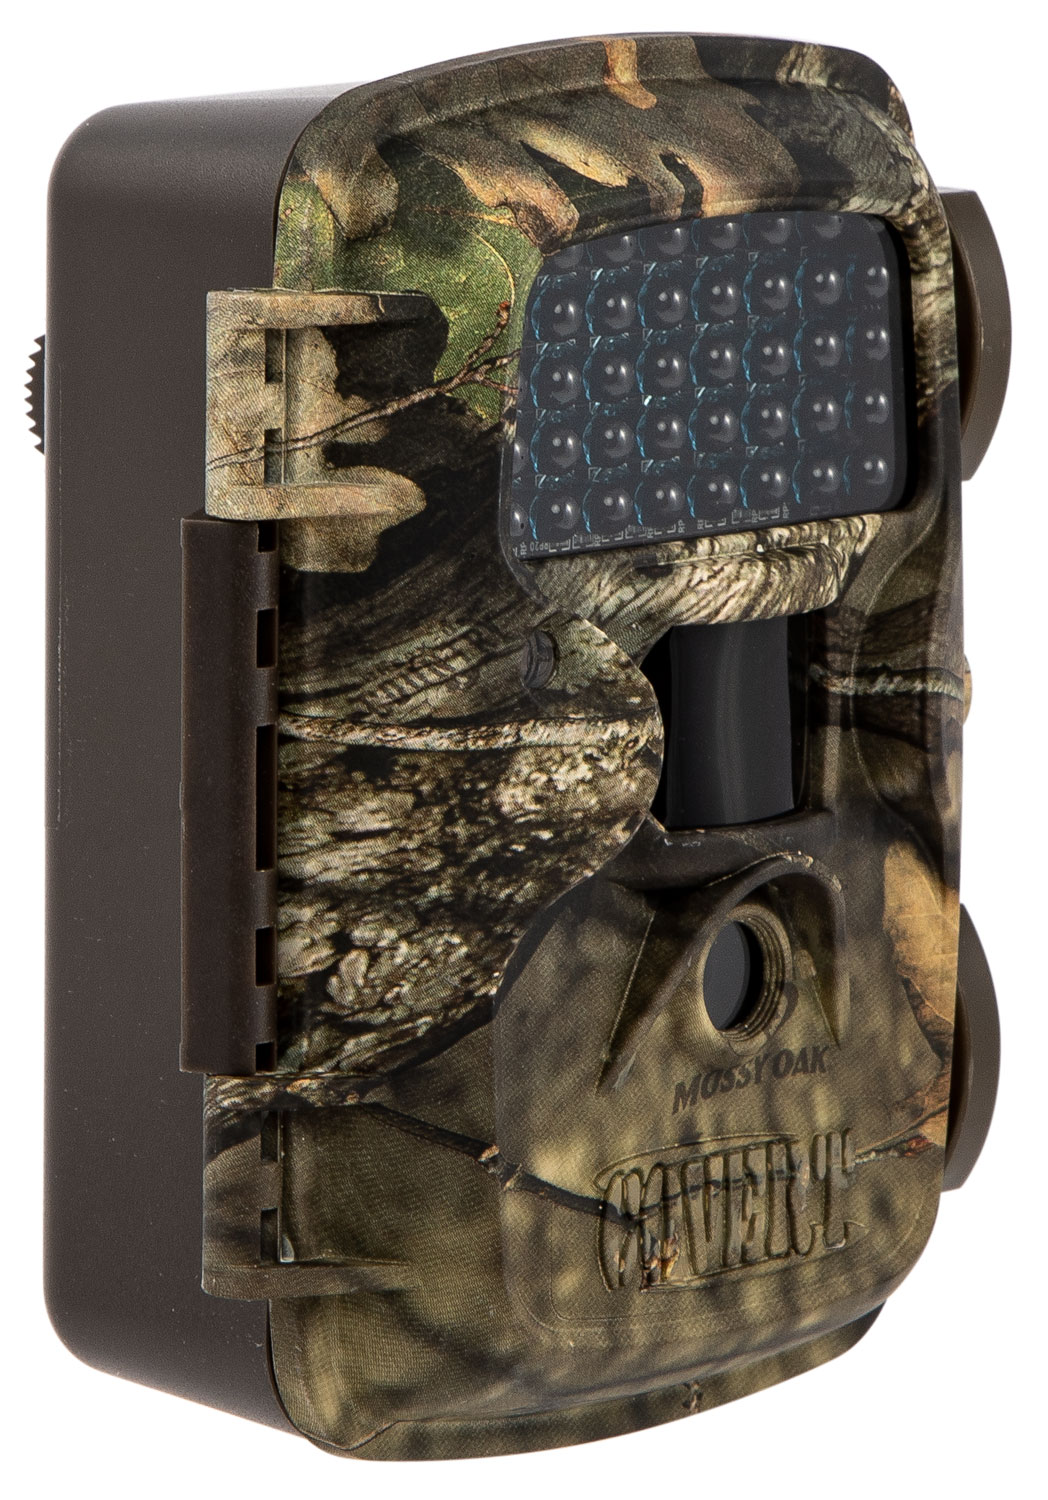 Covert Scouting Cameras 5649 MP16  
Trail Camera 16 MP Mossy Oak Break-Up Country